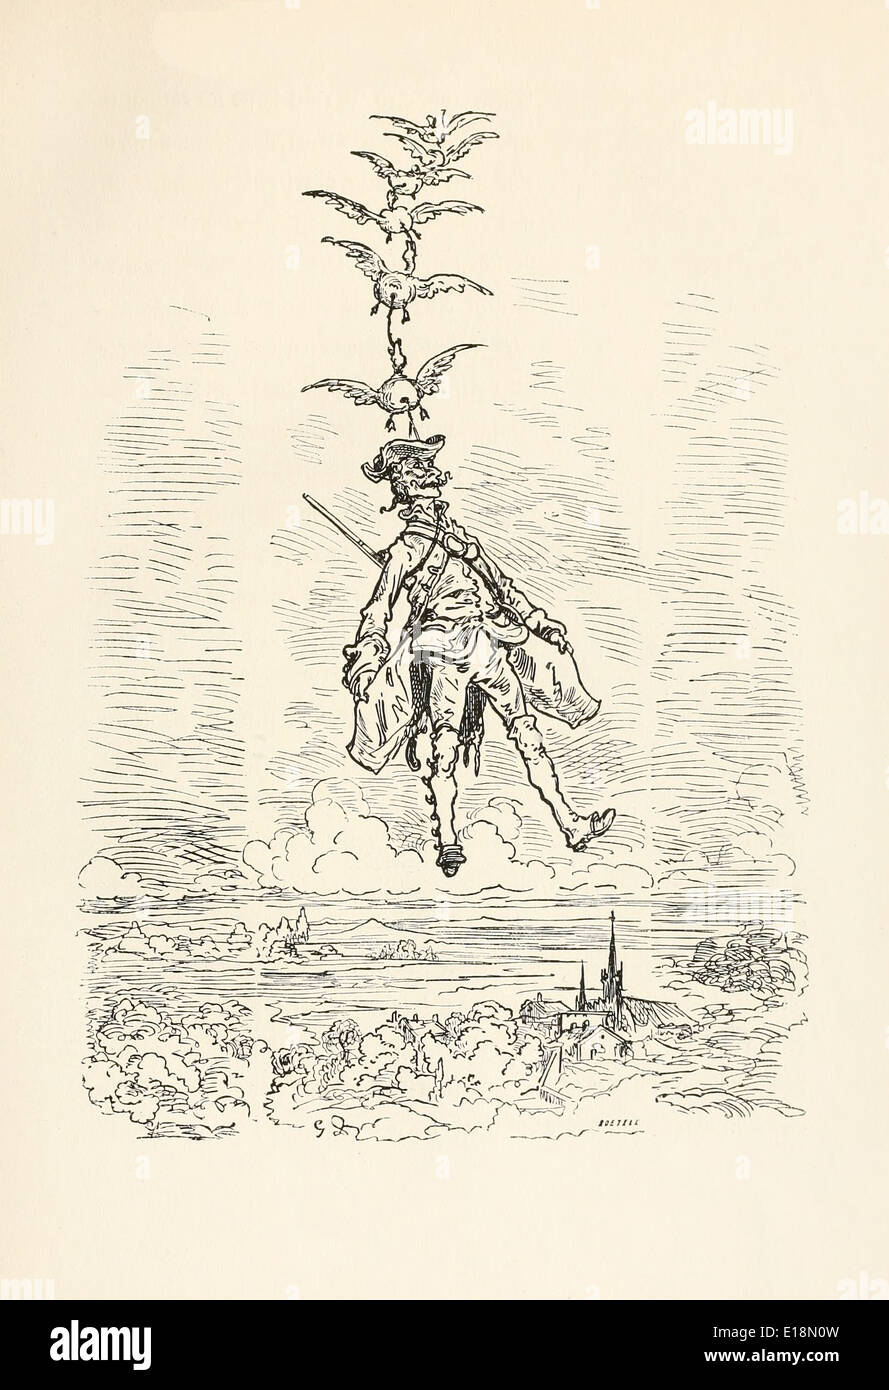 Paul Gustave Doré (1832-1883) illustration from ‘The Adventures of Baron Munchausen’ by Rudoph Raspe published in 1862. Flying Stock Photo